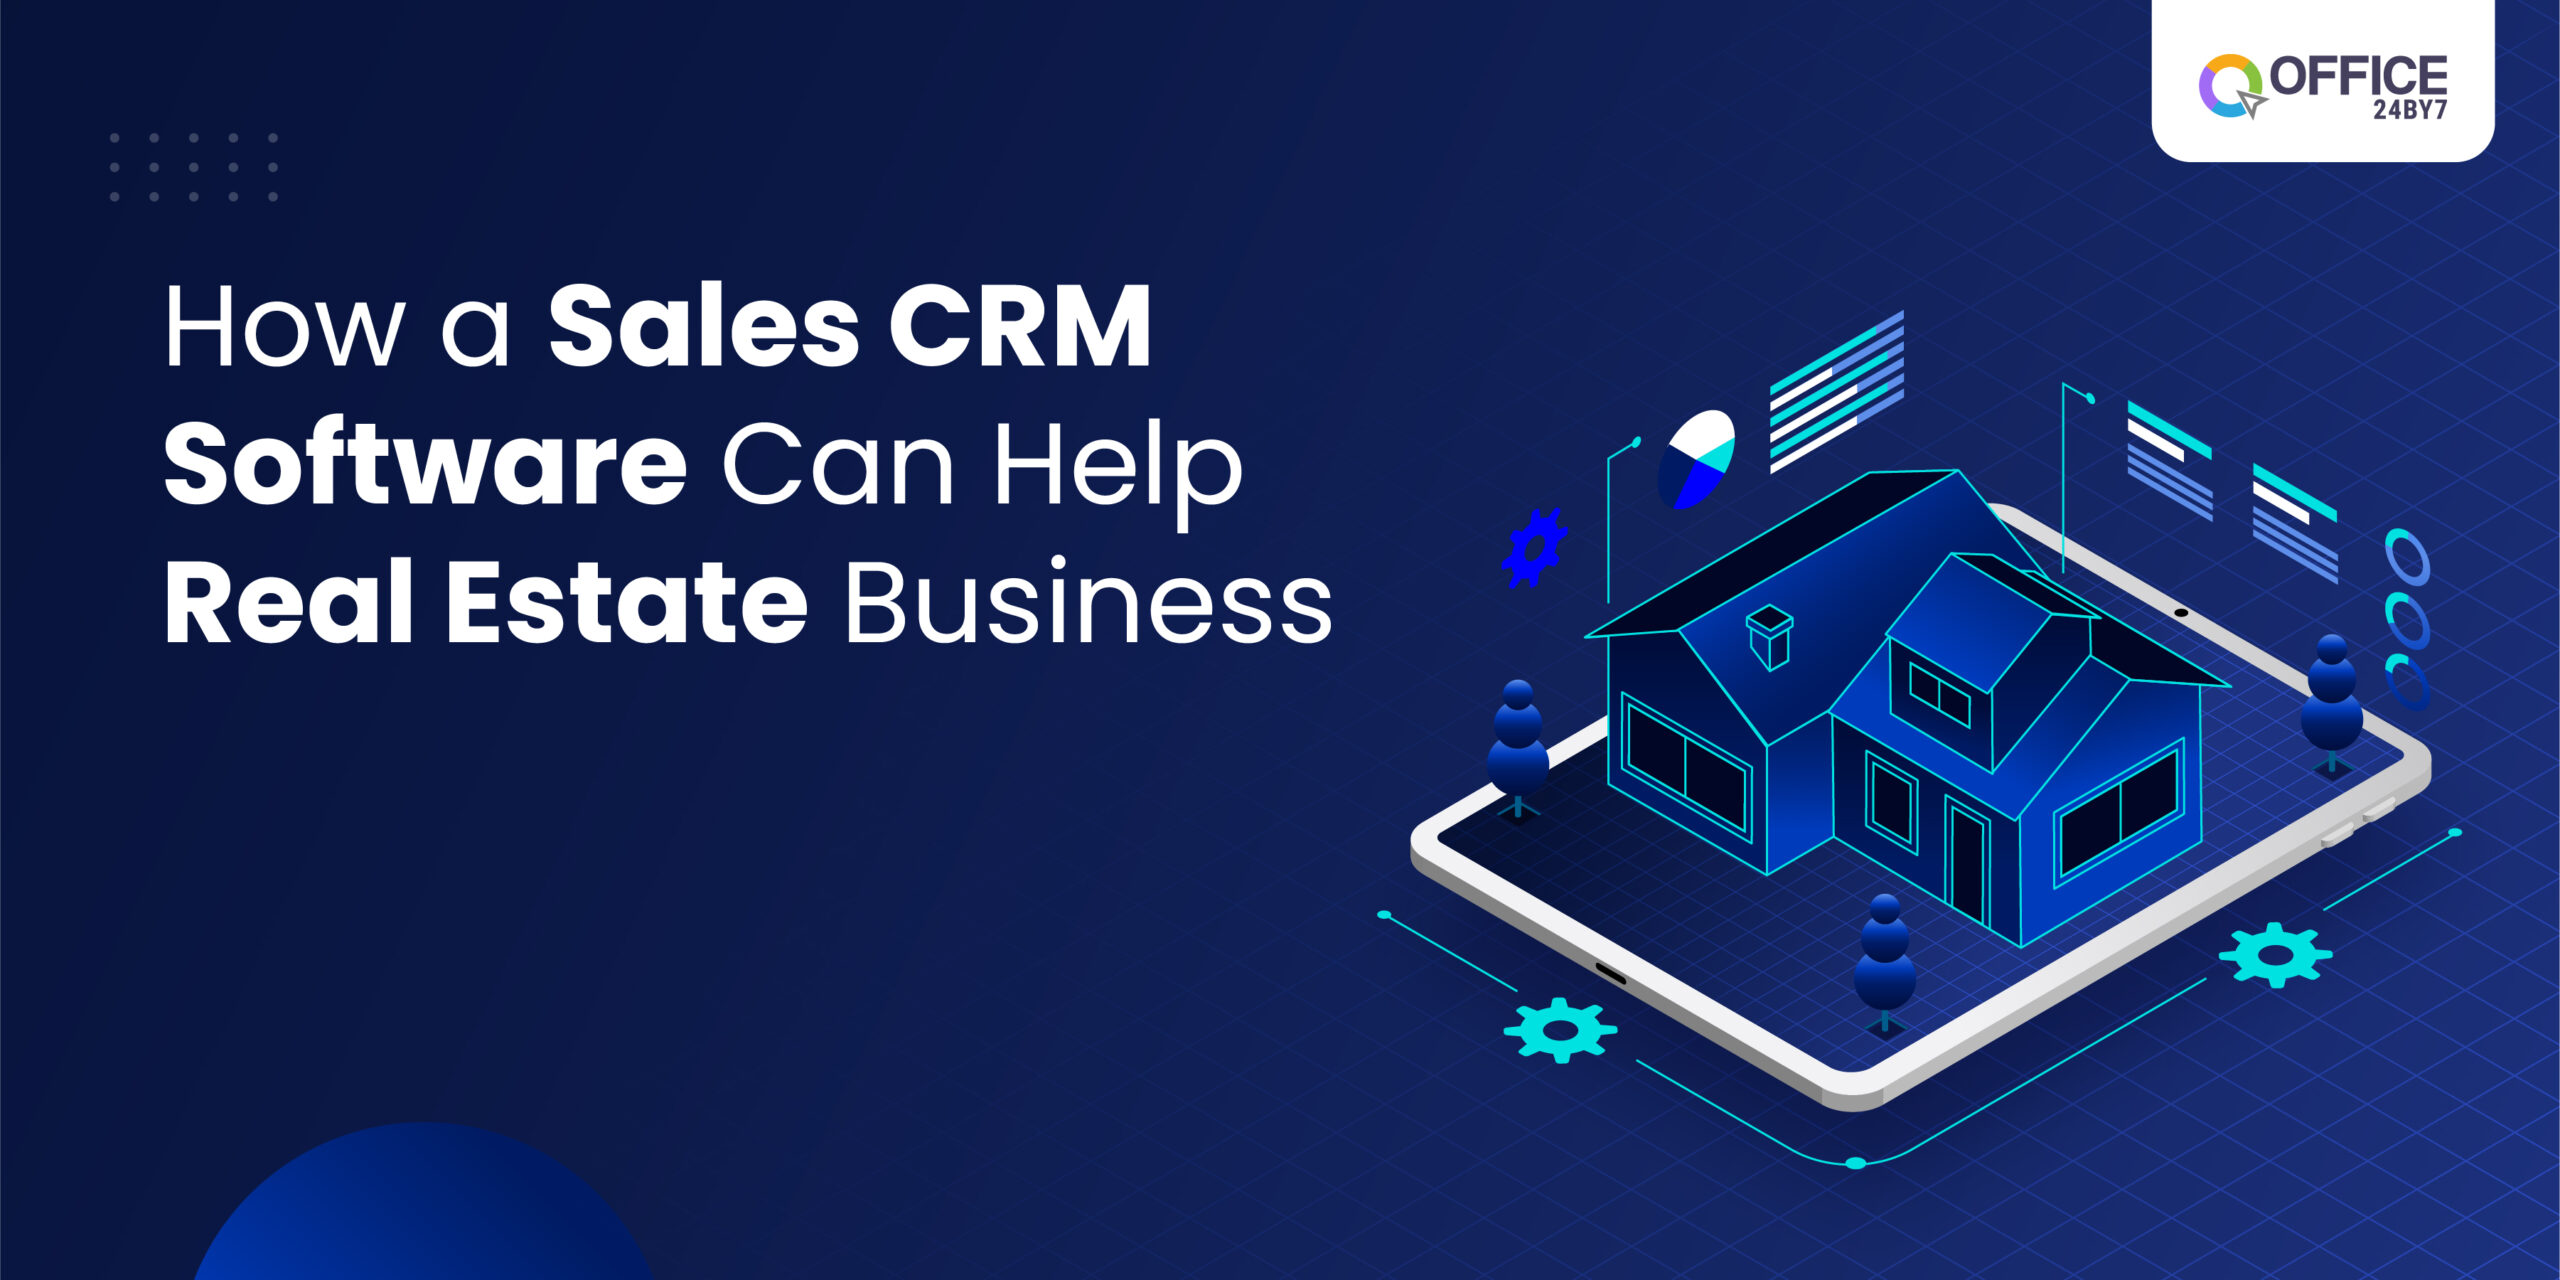 How sales CRM can help real estate business